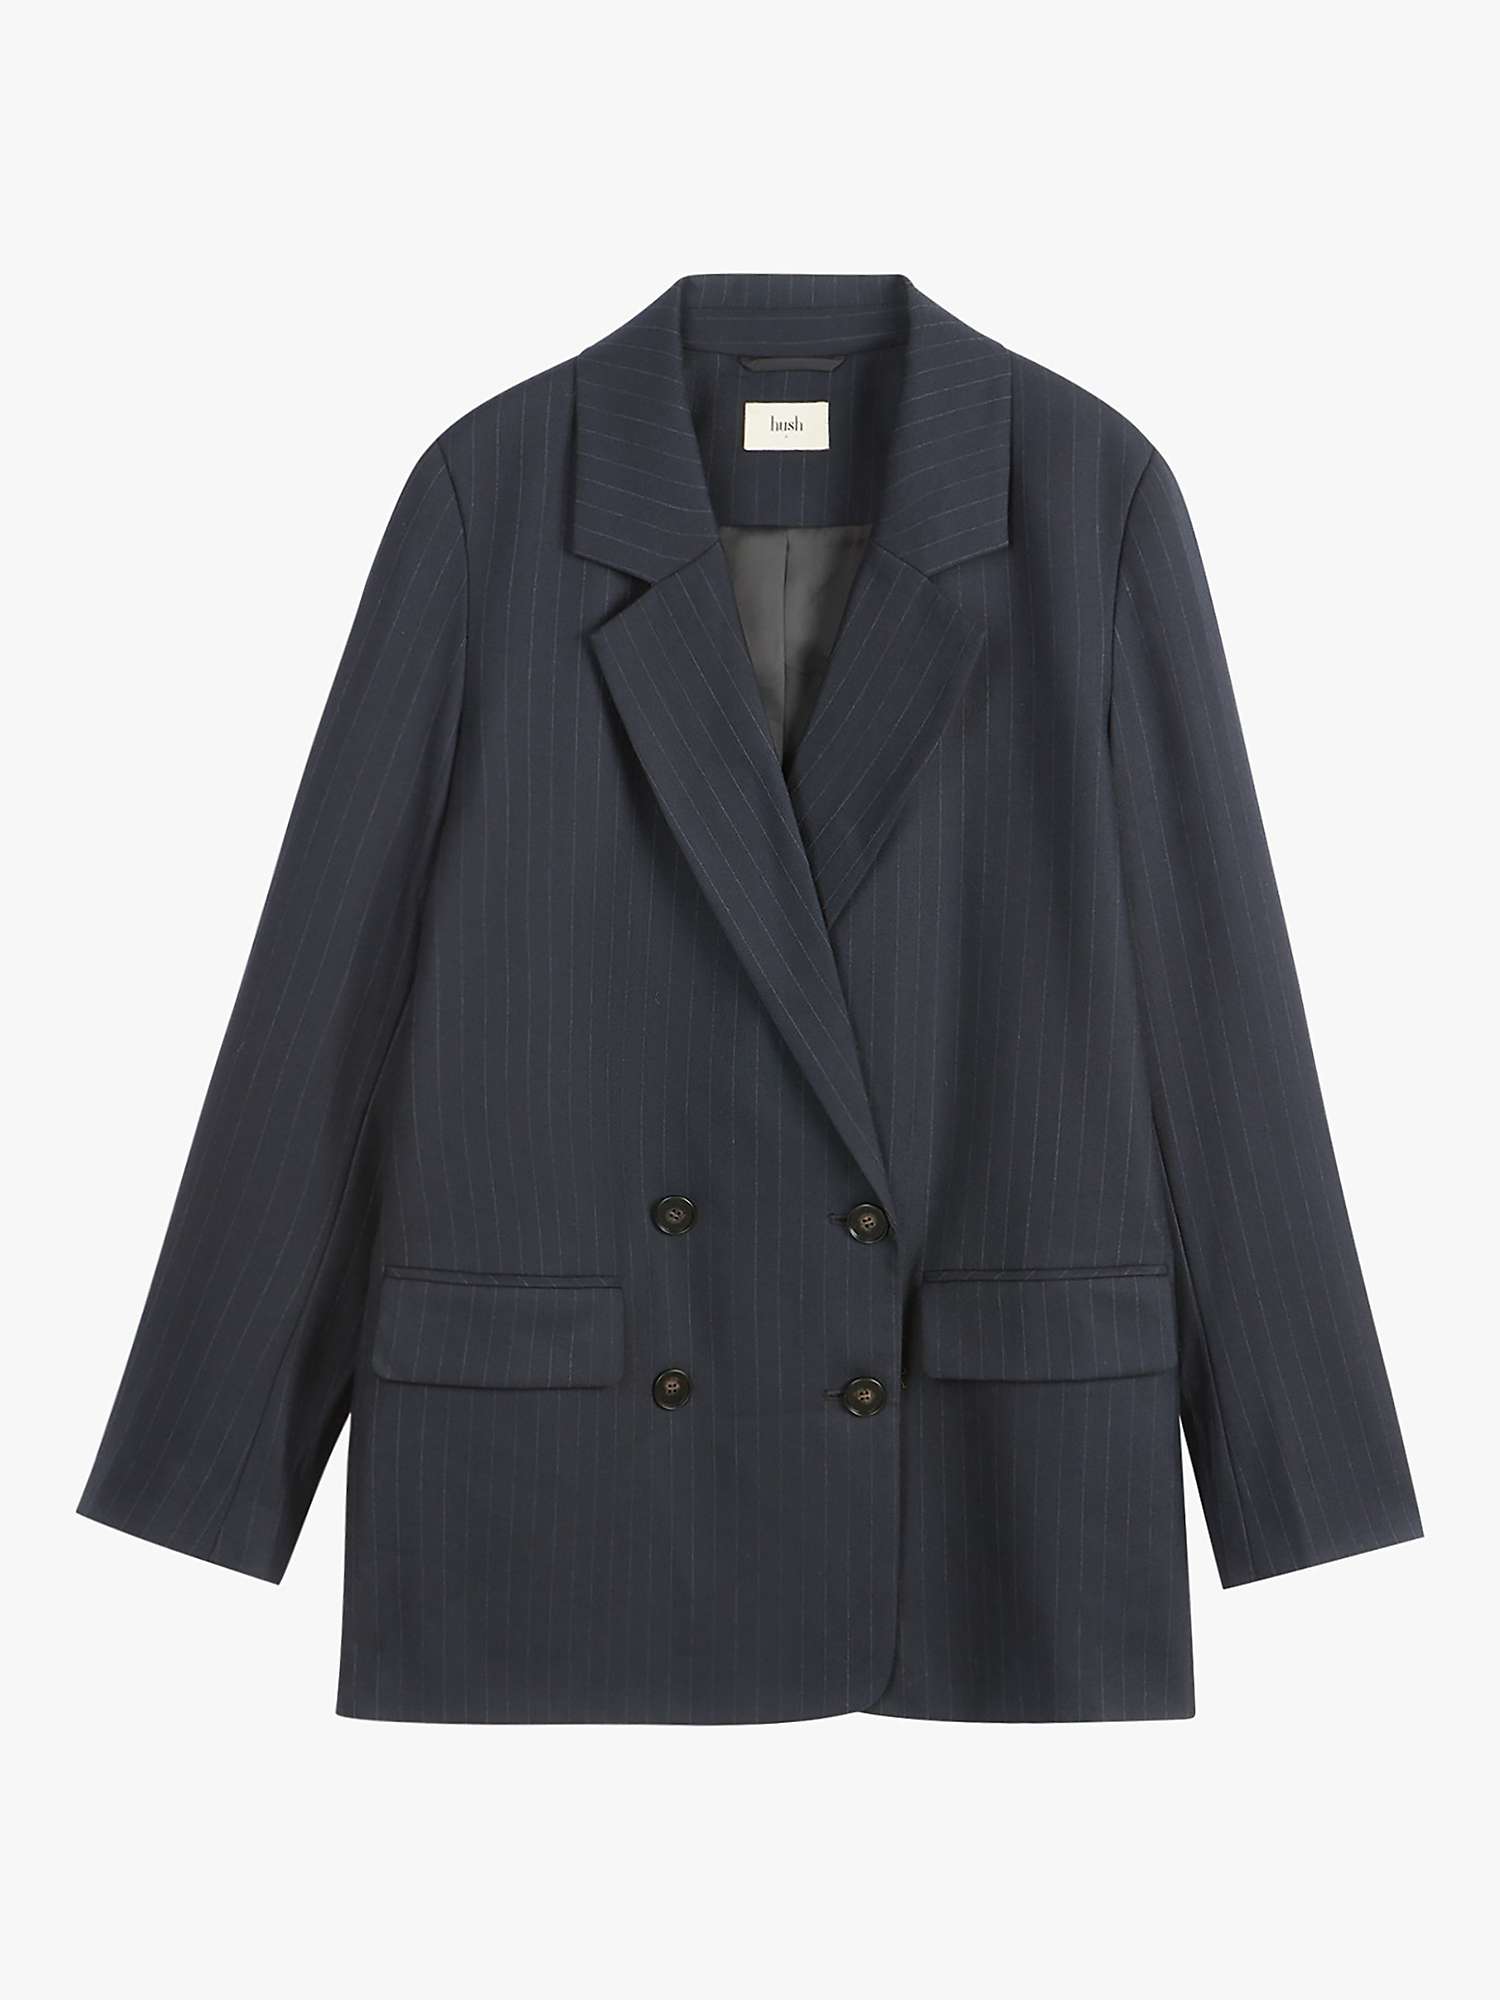 Buy HUSH Double Breasted Pinstripe Blazer, Midnight Navy Online at johnlewis.com